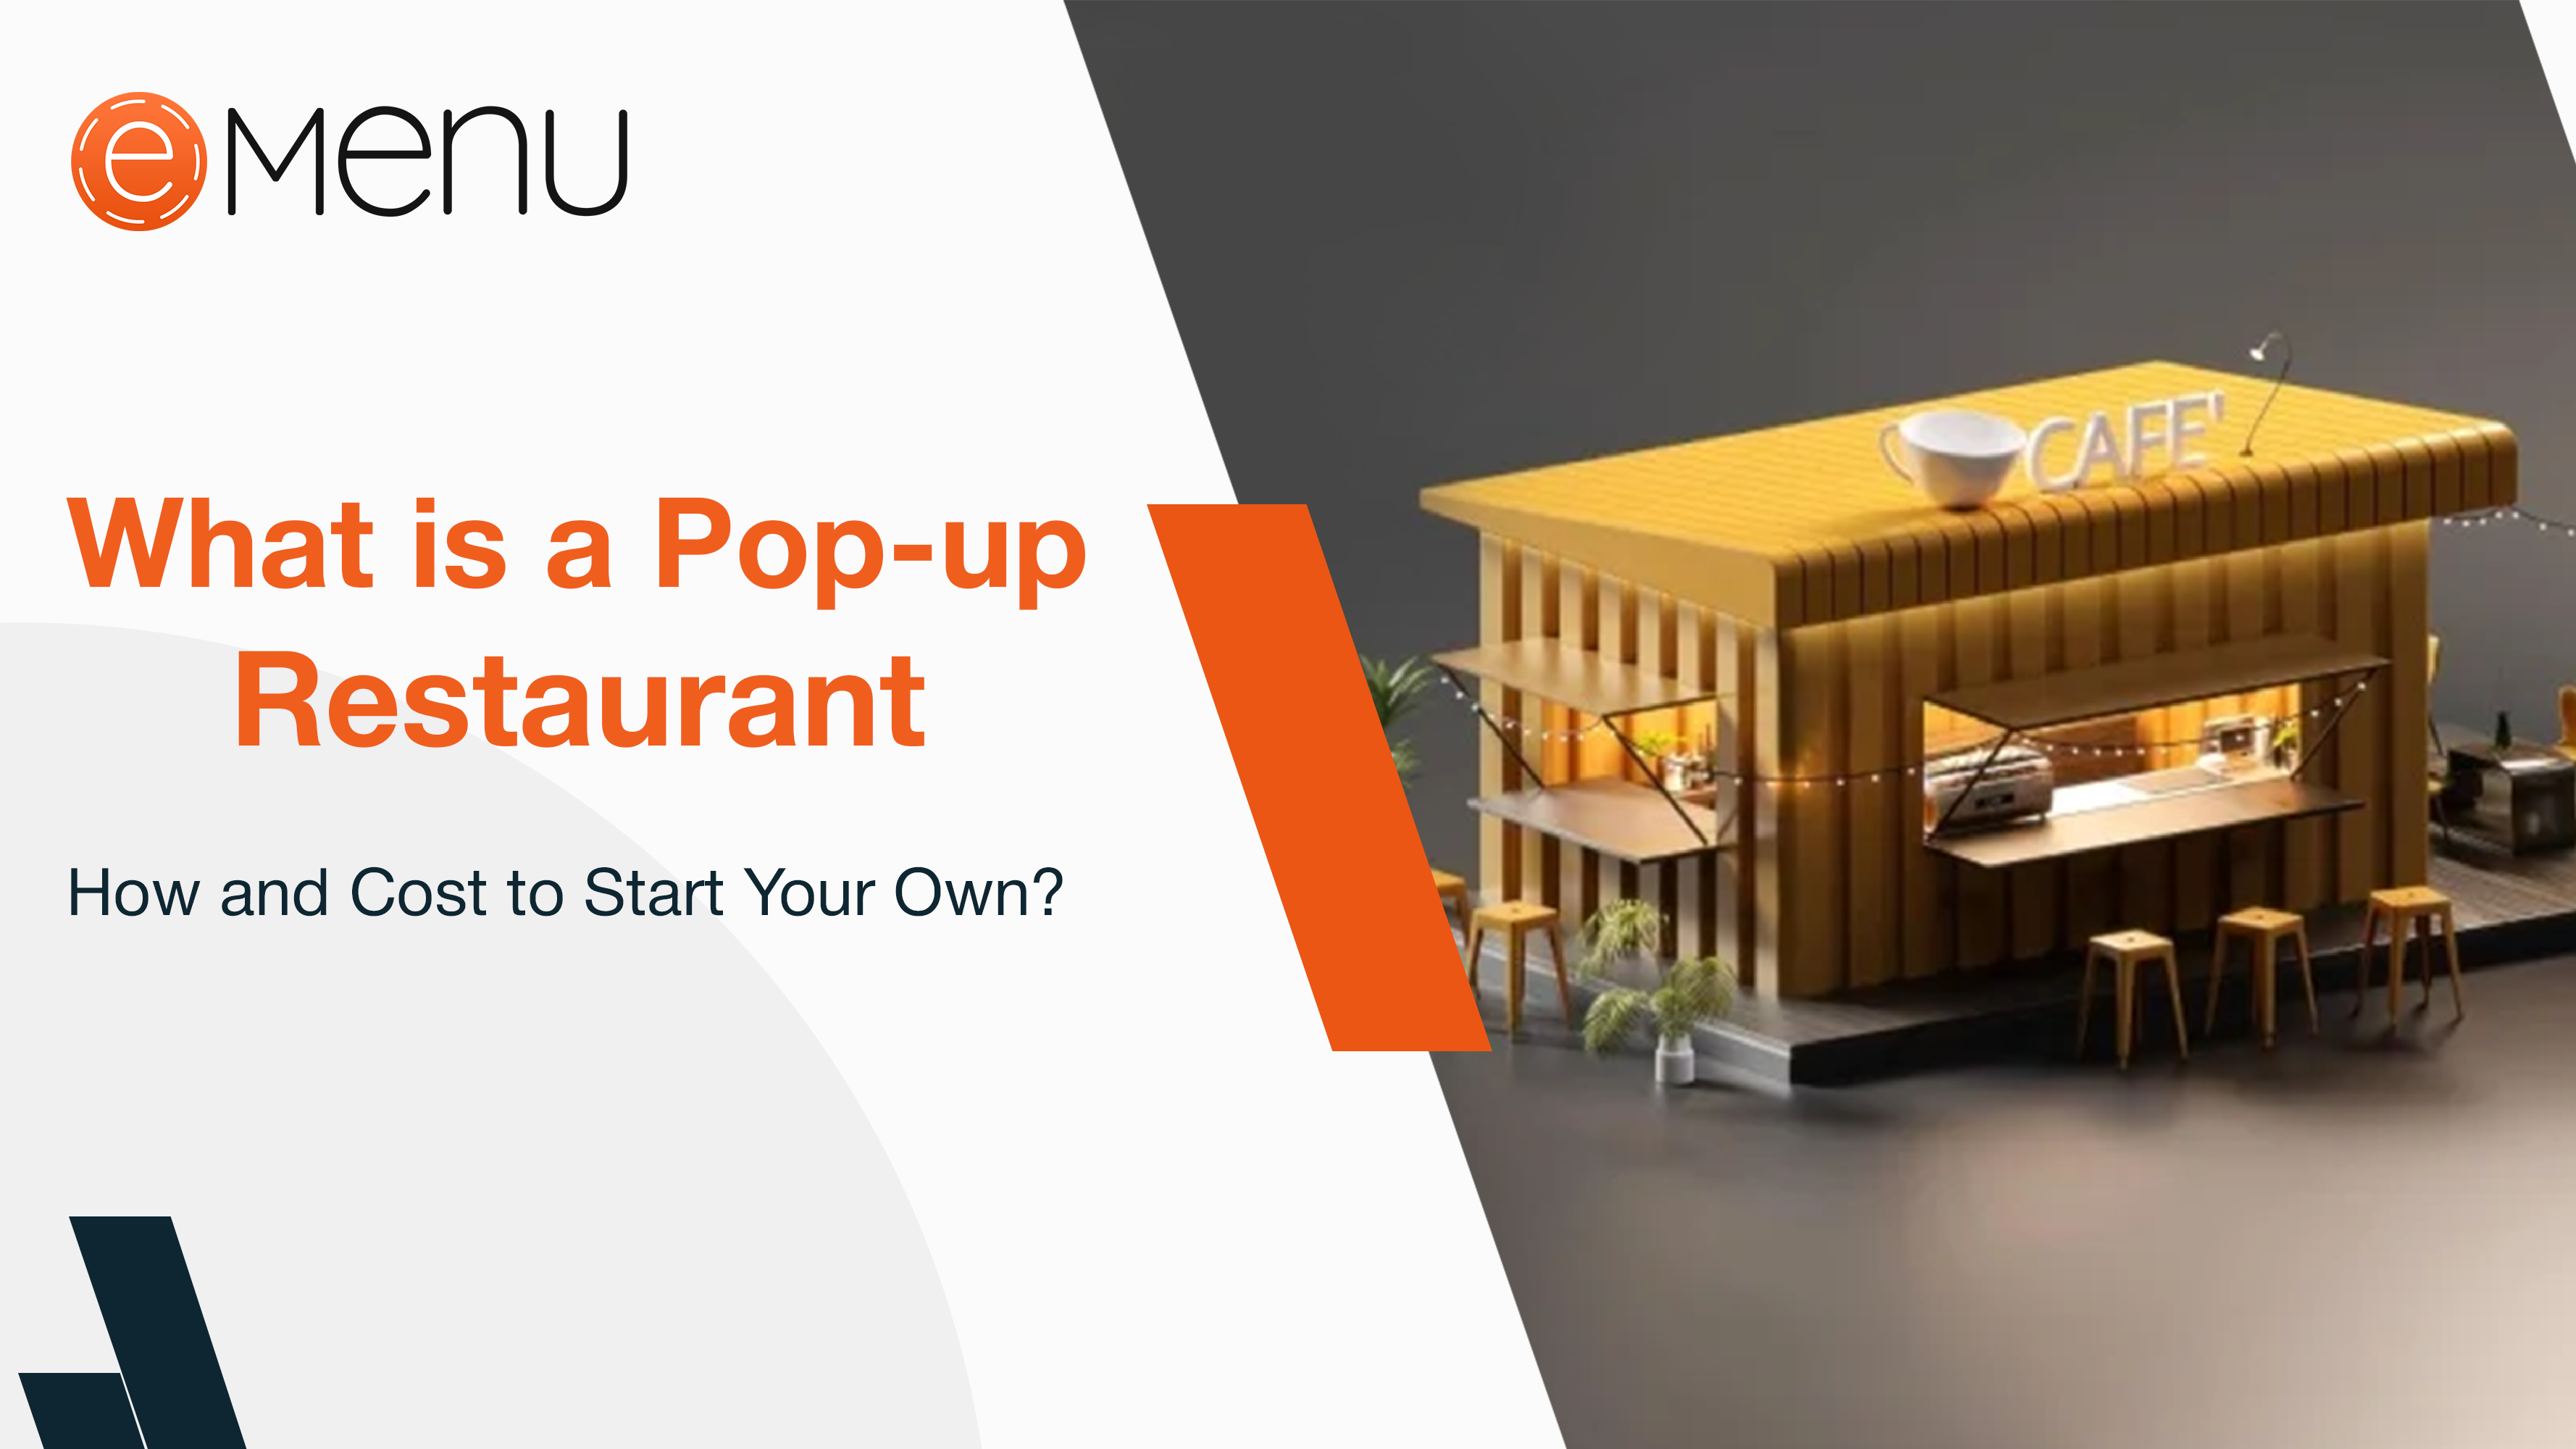 What is a Pop-up Restaurant? how much does it cost to open a pop-up restaurant (Online eMenu Tips)